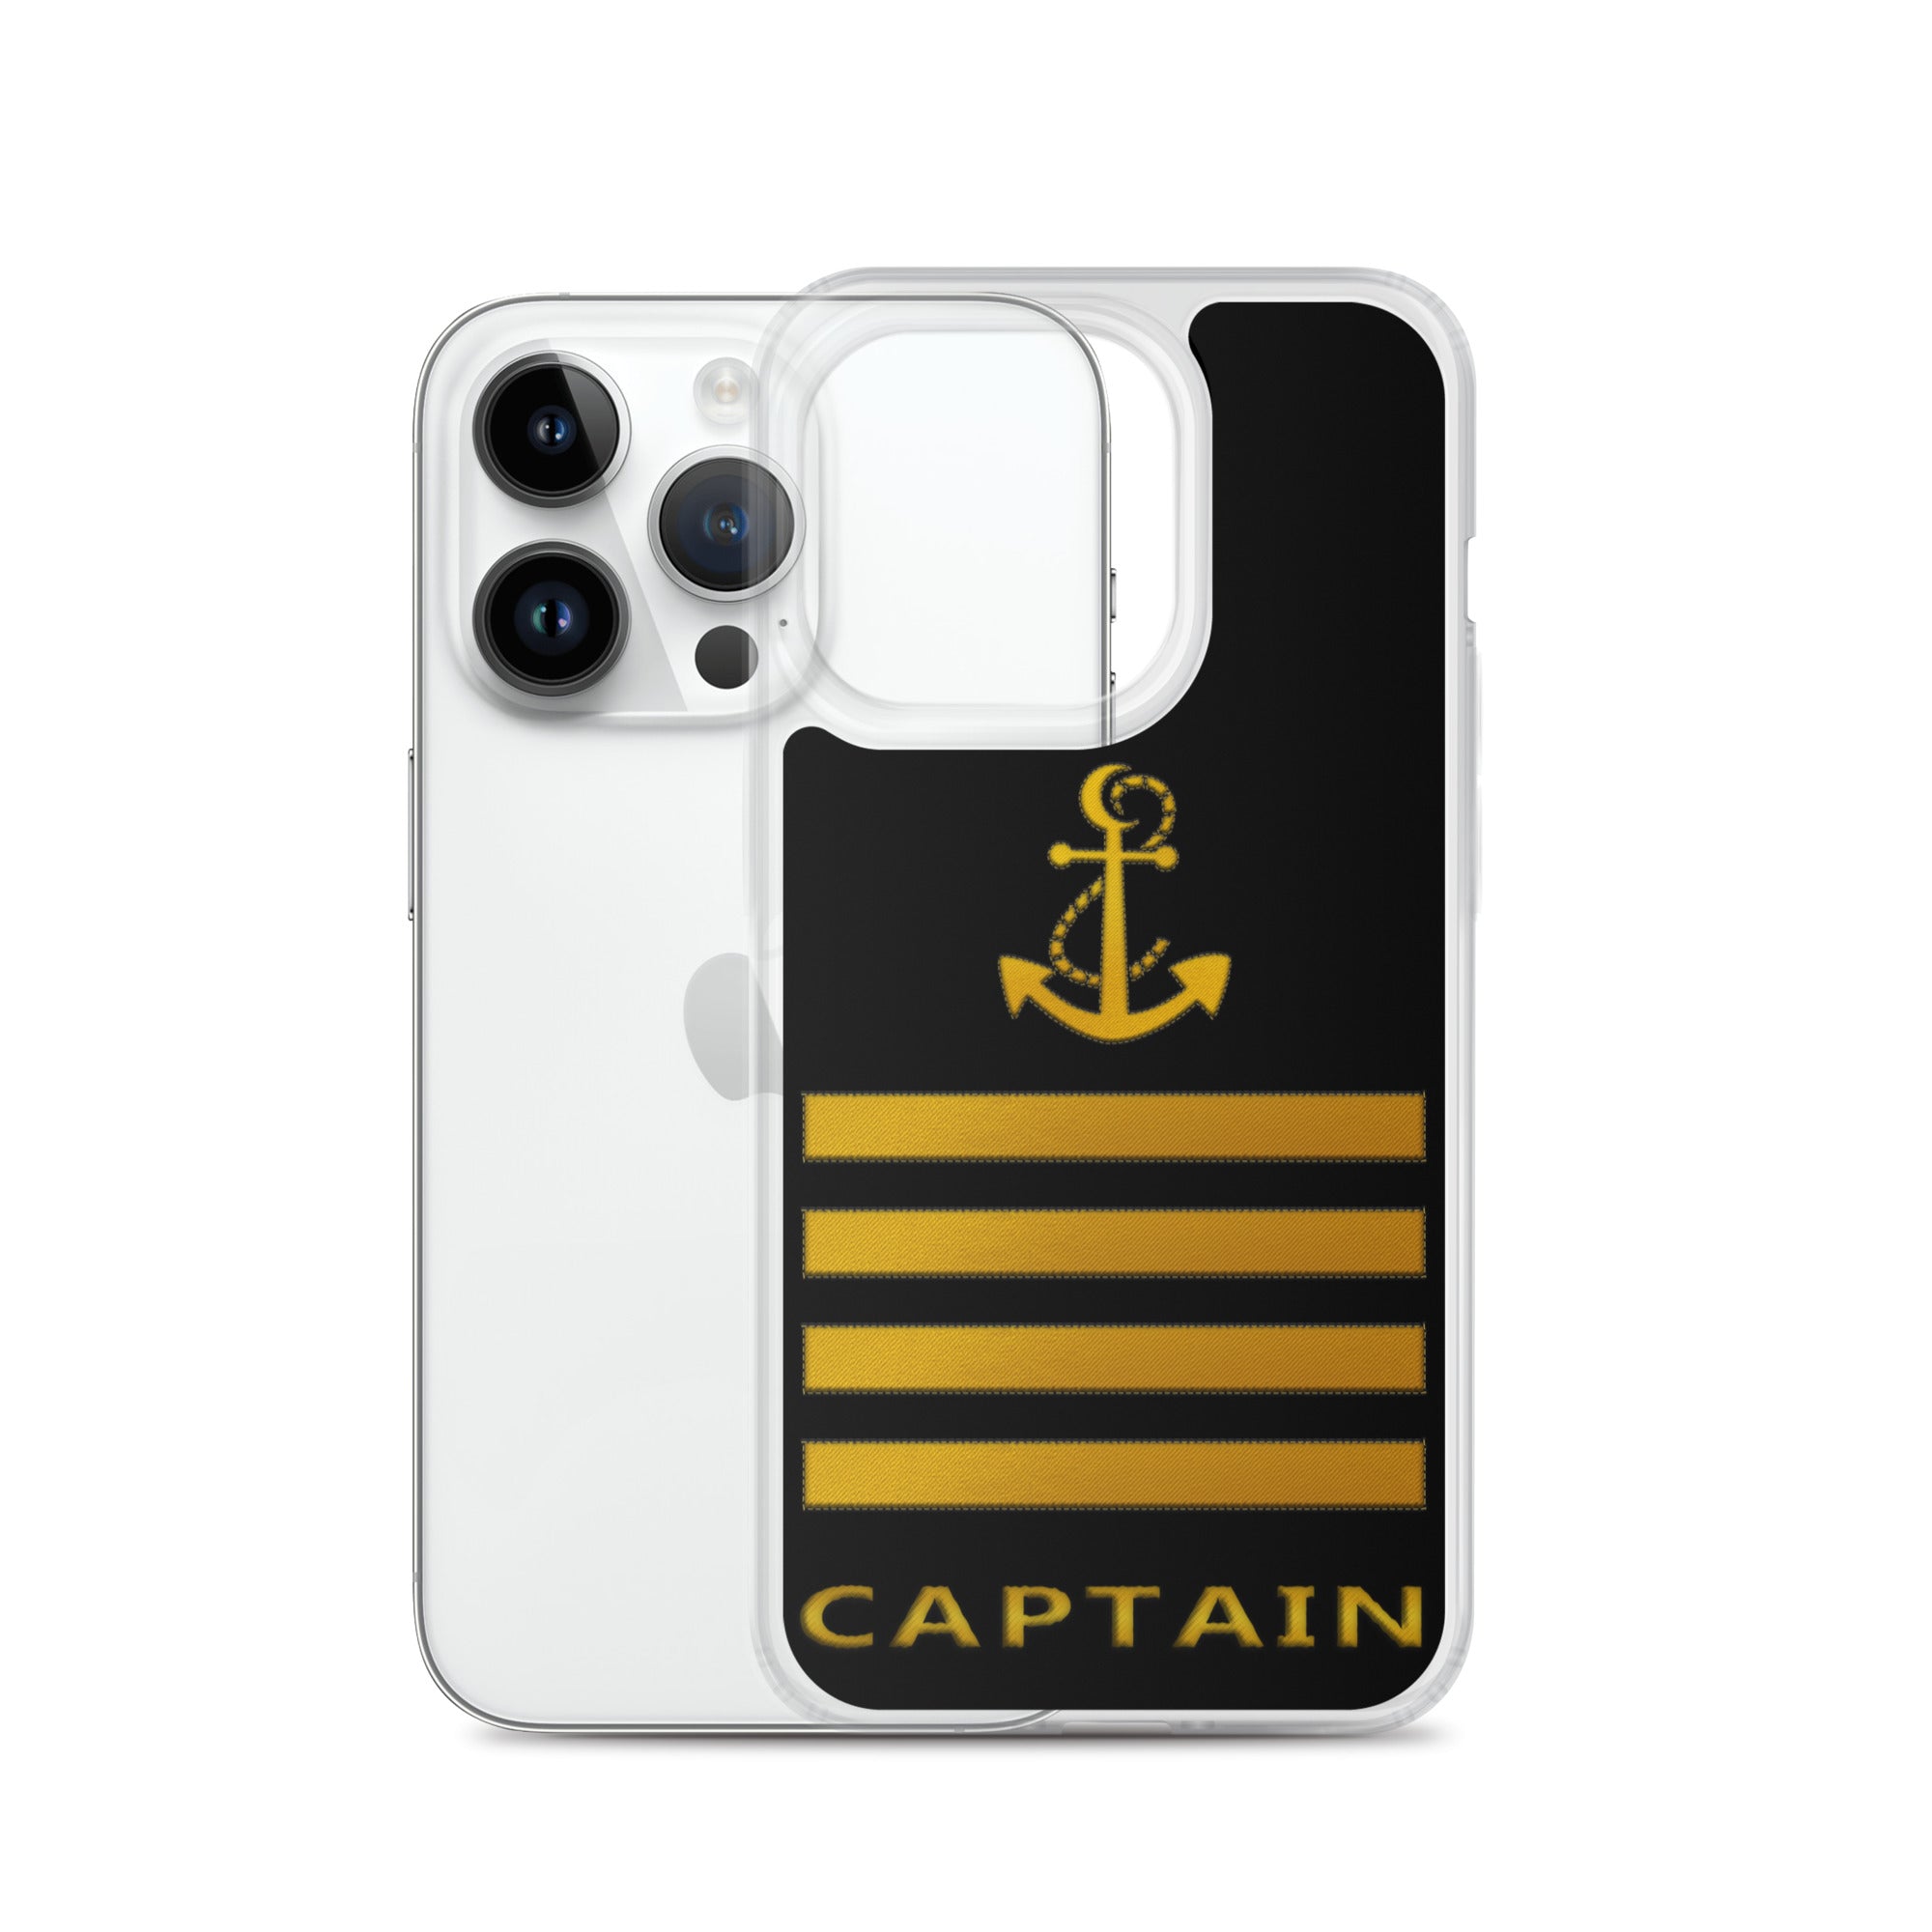 Iphone Case Captain Anchor and Stripes